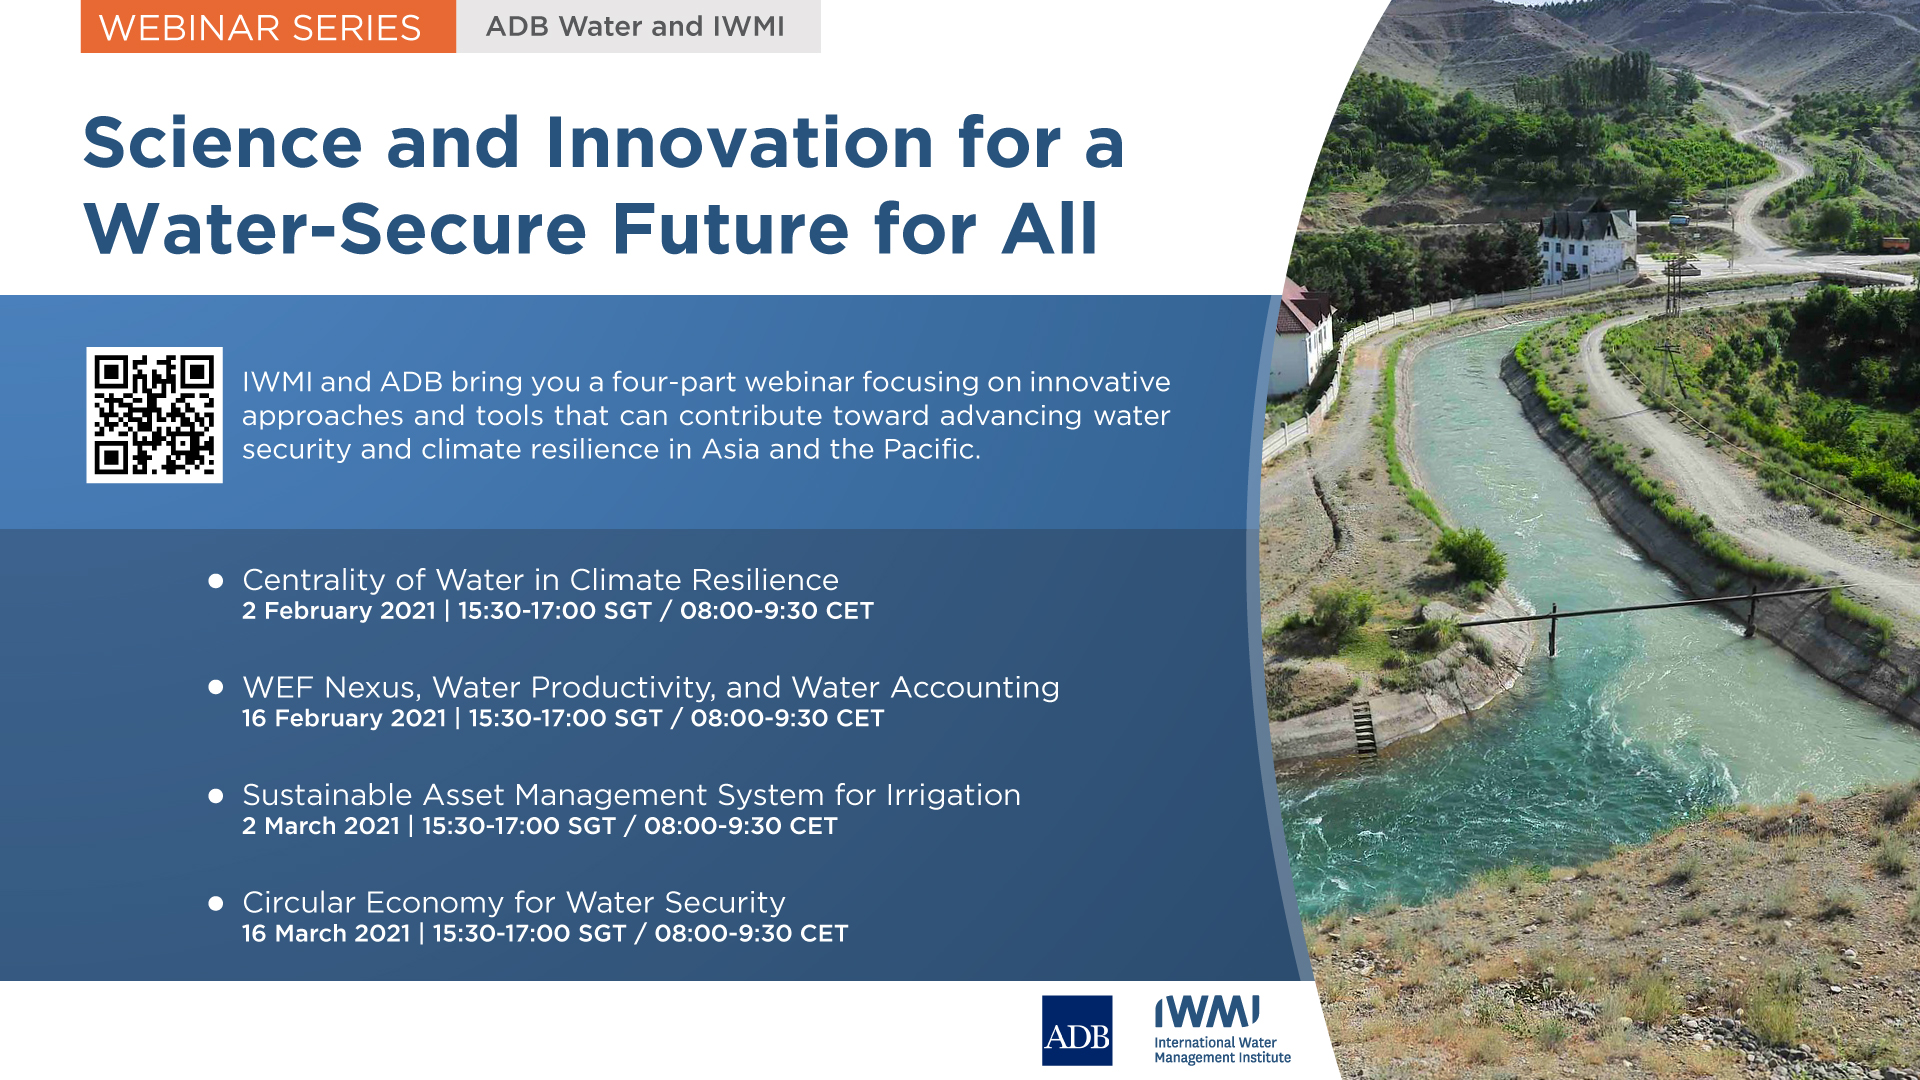 ADB Water Watch: Science and Innovation for a Water-Secure Future for All